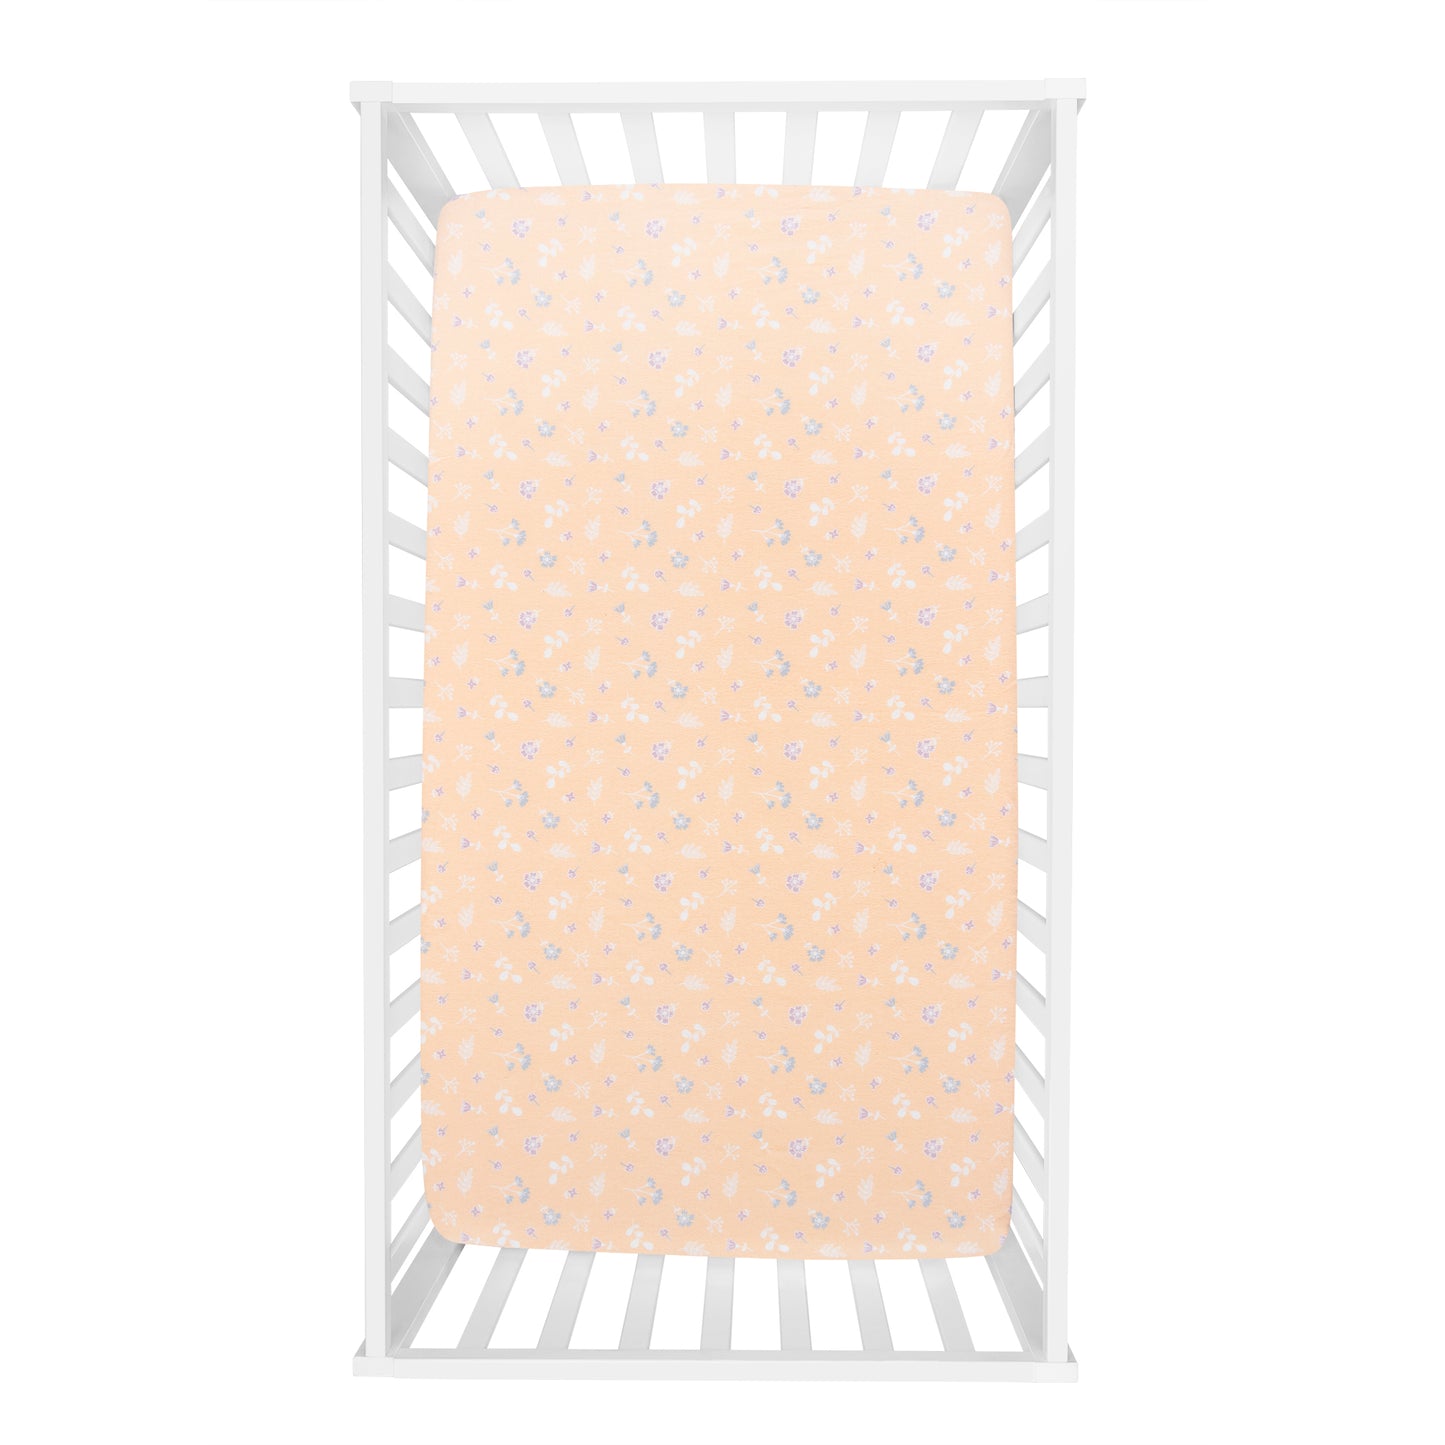 Floral Deluxe Flannel Fitted Crib Sheet - overhead view